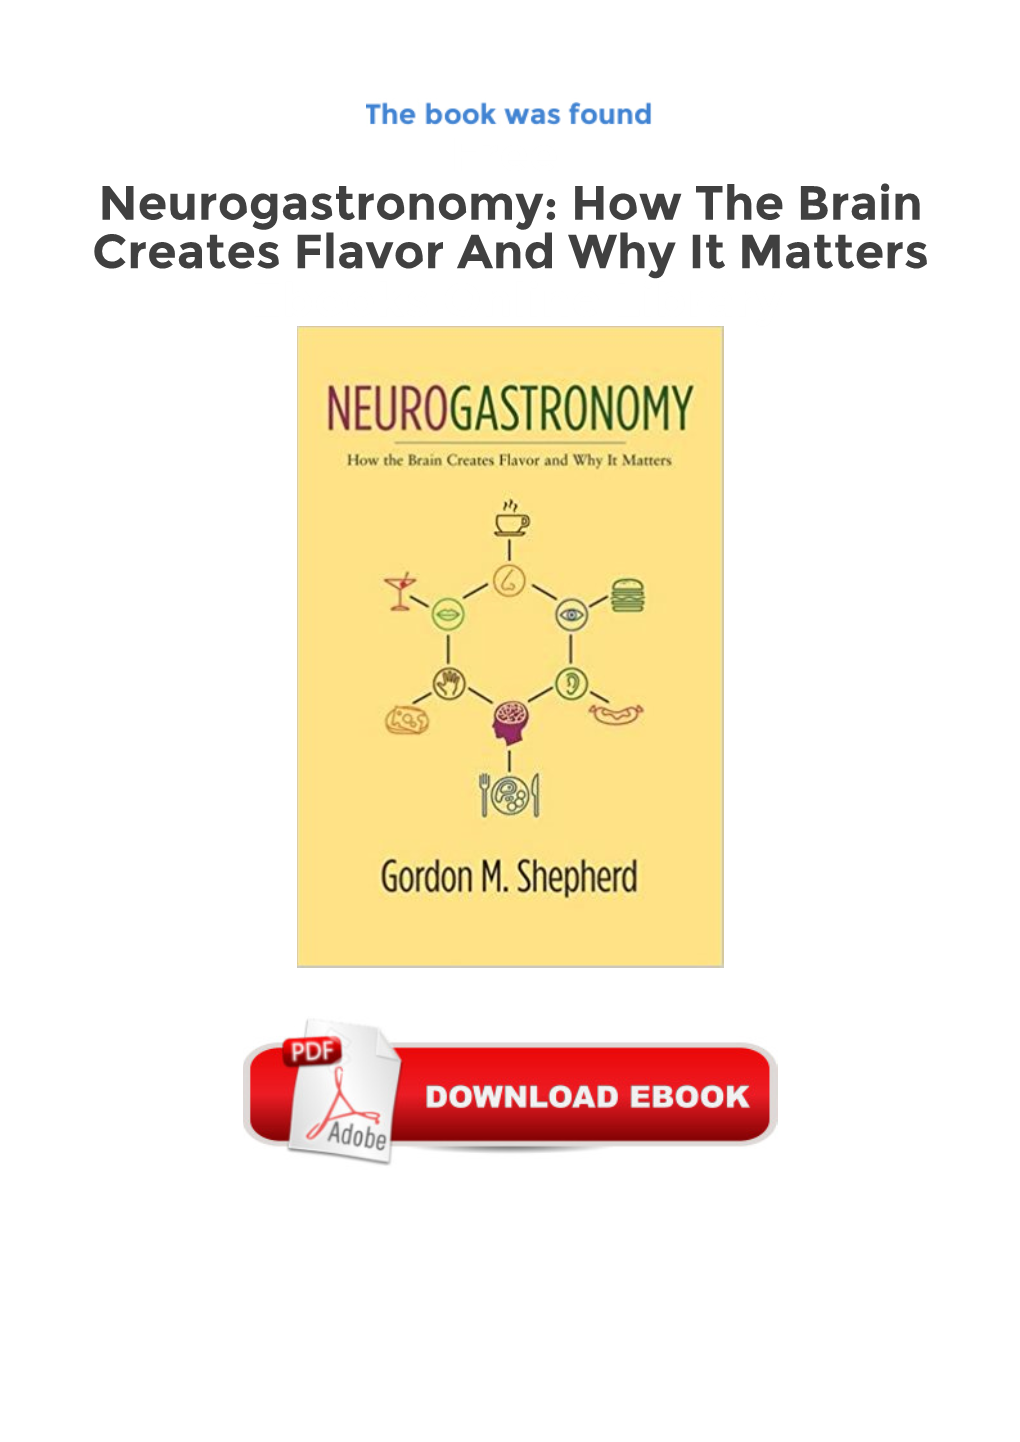 Neurogastronomy: How the Brain Creates Flavor and Why It Matters Ebooks Online Library Leading Neuroscientist Gordon M